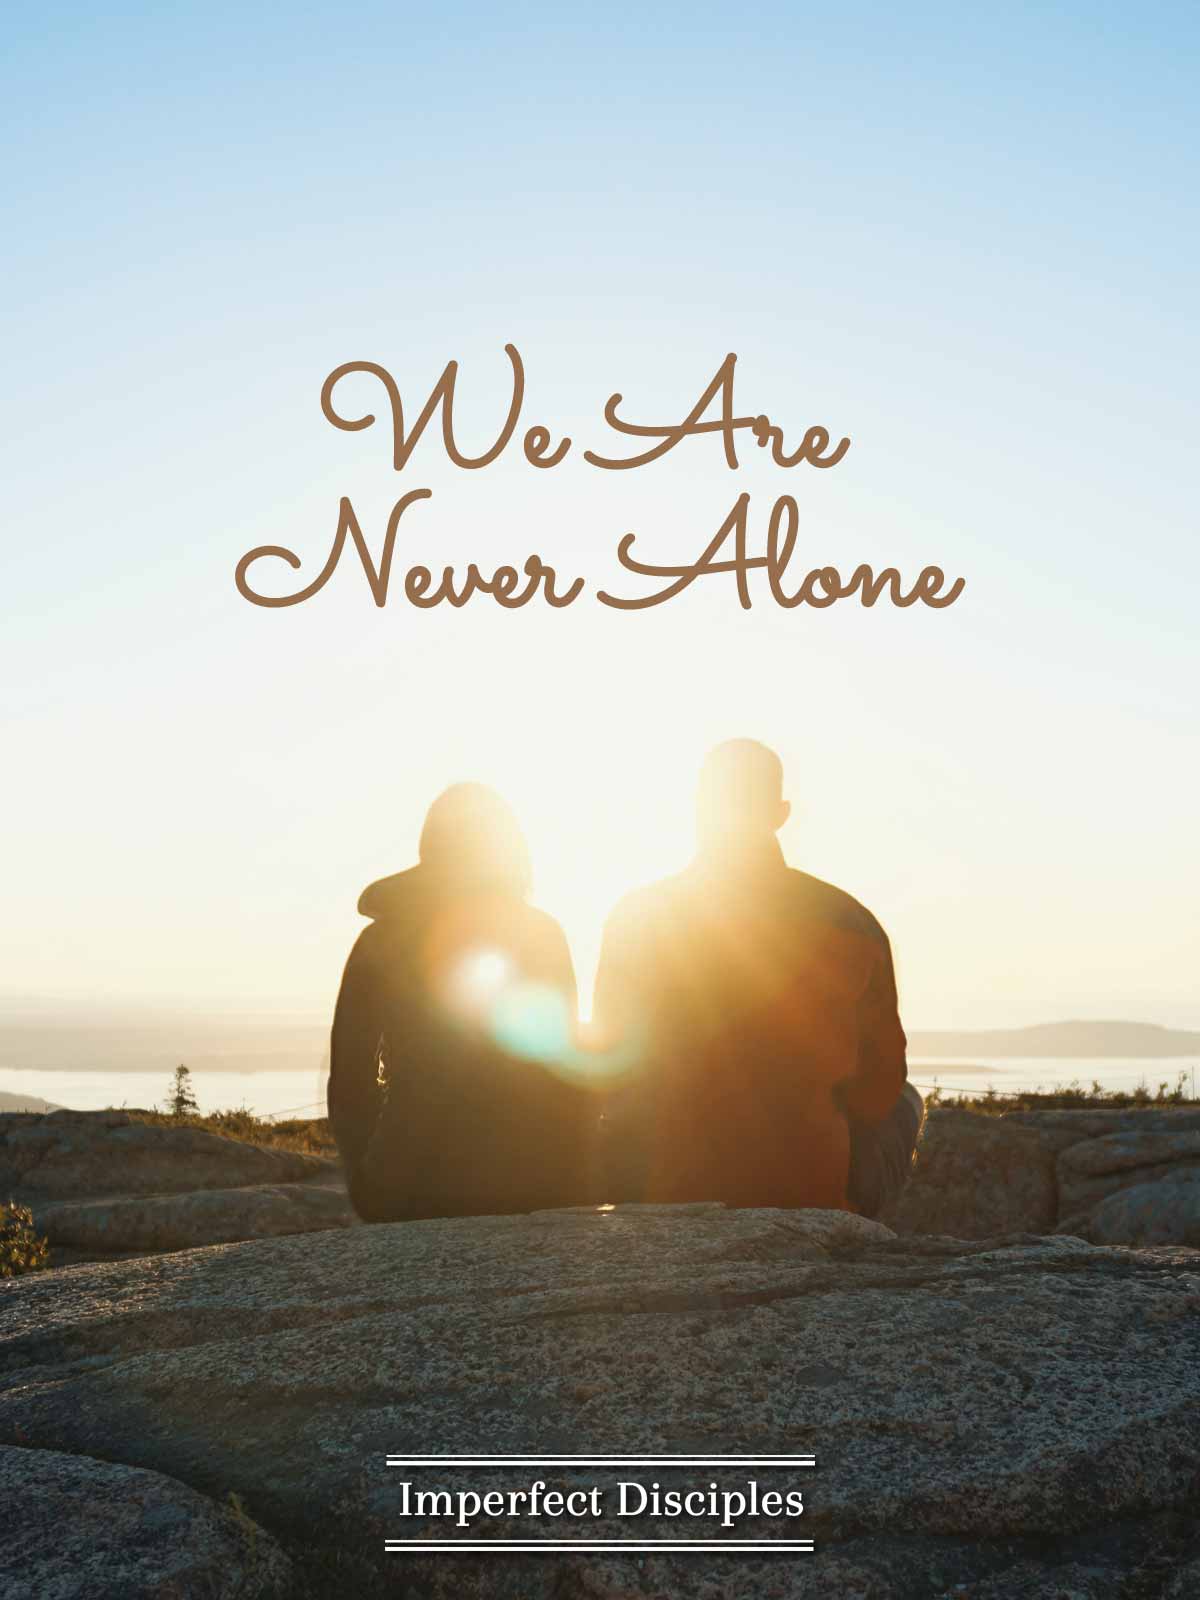 We Are Never Alone